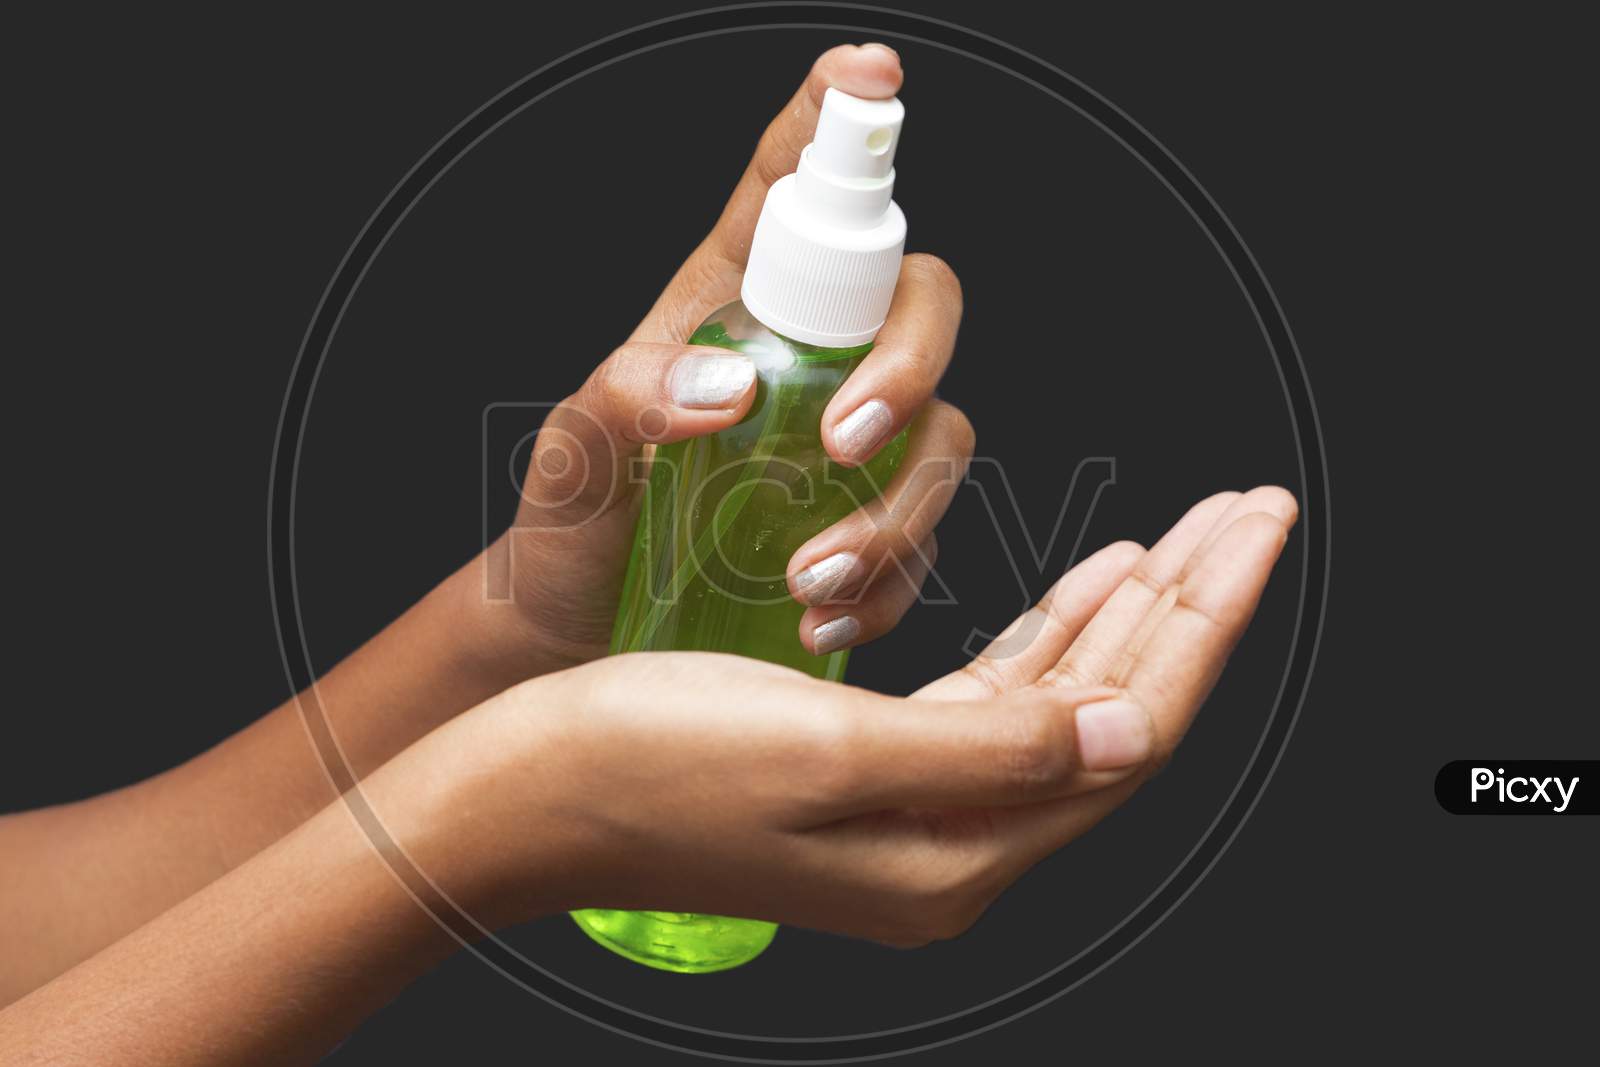 a lady sanitized her hands by alcohol hand sanitizer to avoid covid-19.